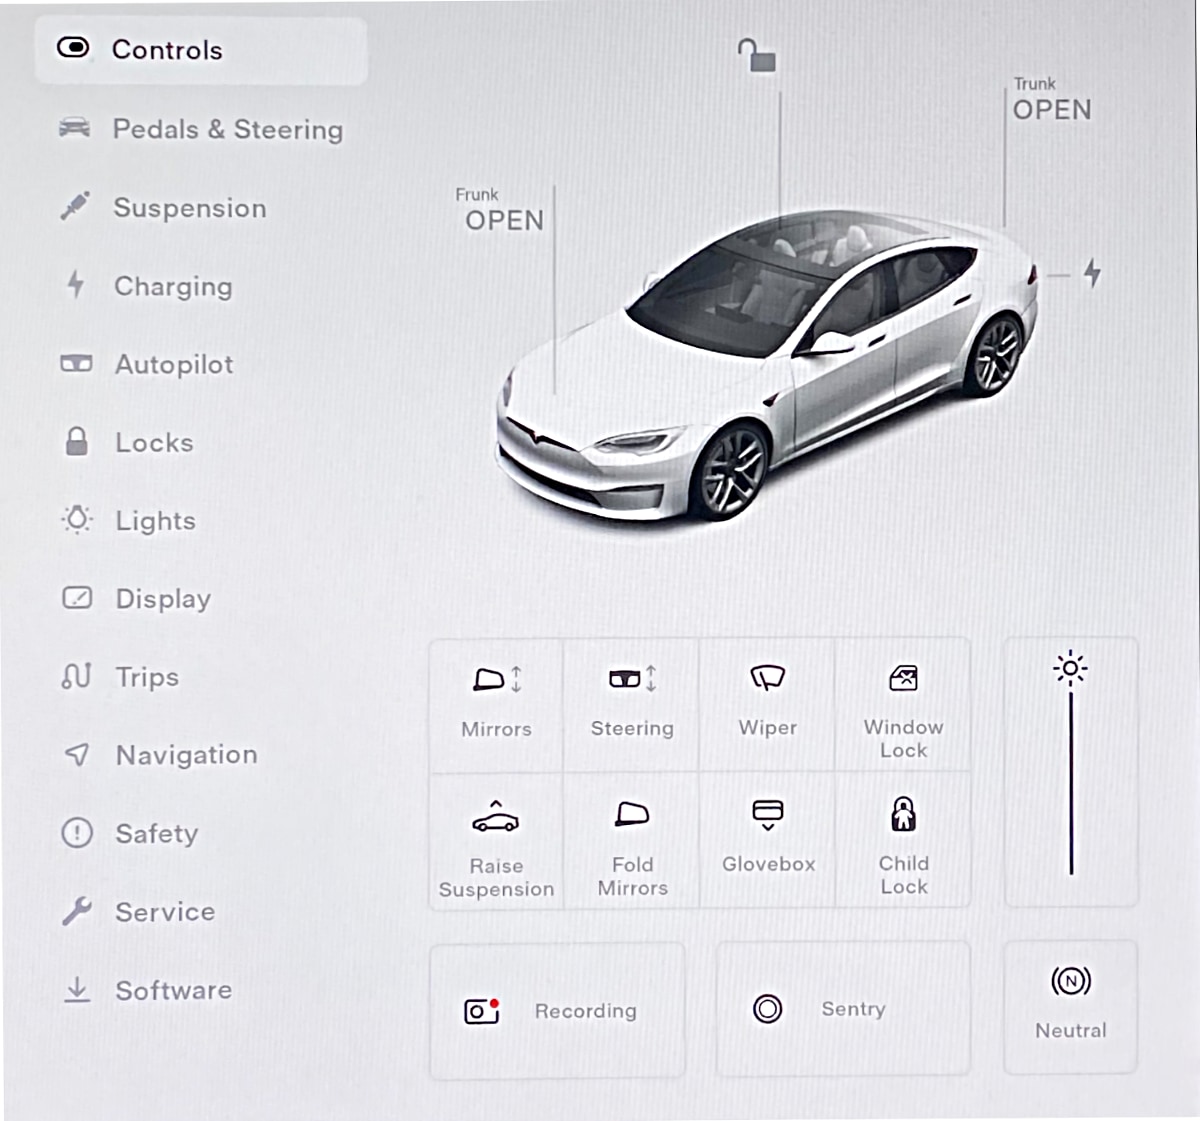 Tesla Redesigned Controls Panel feature in update 2021.32.21